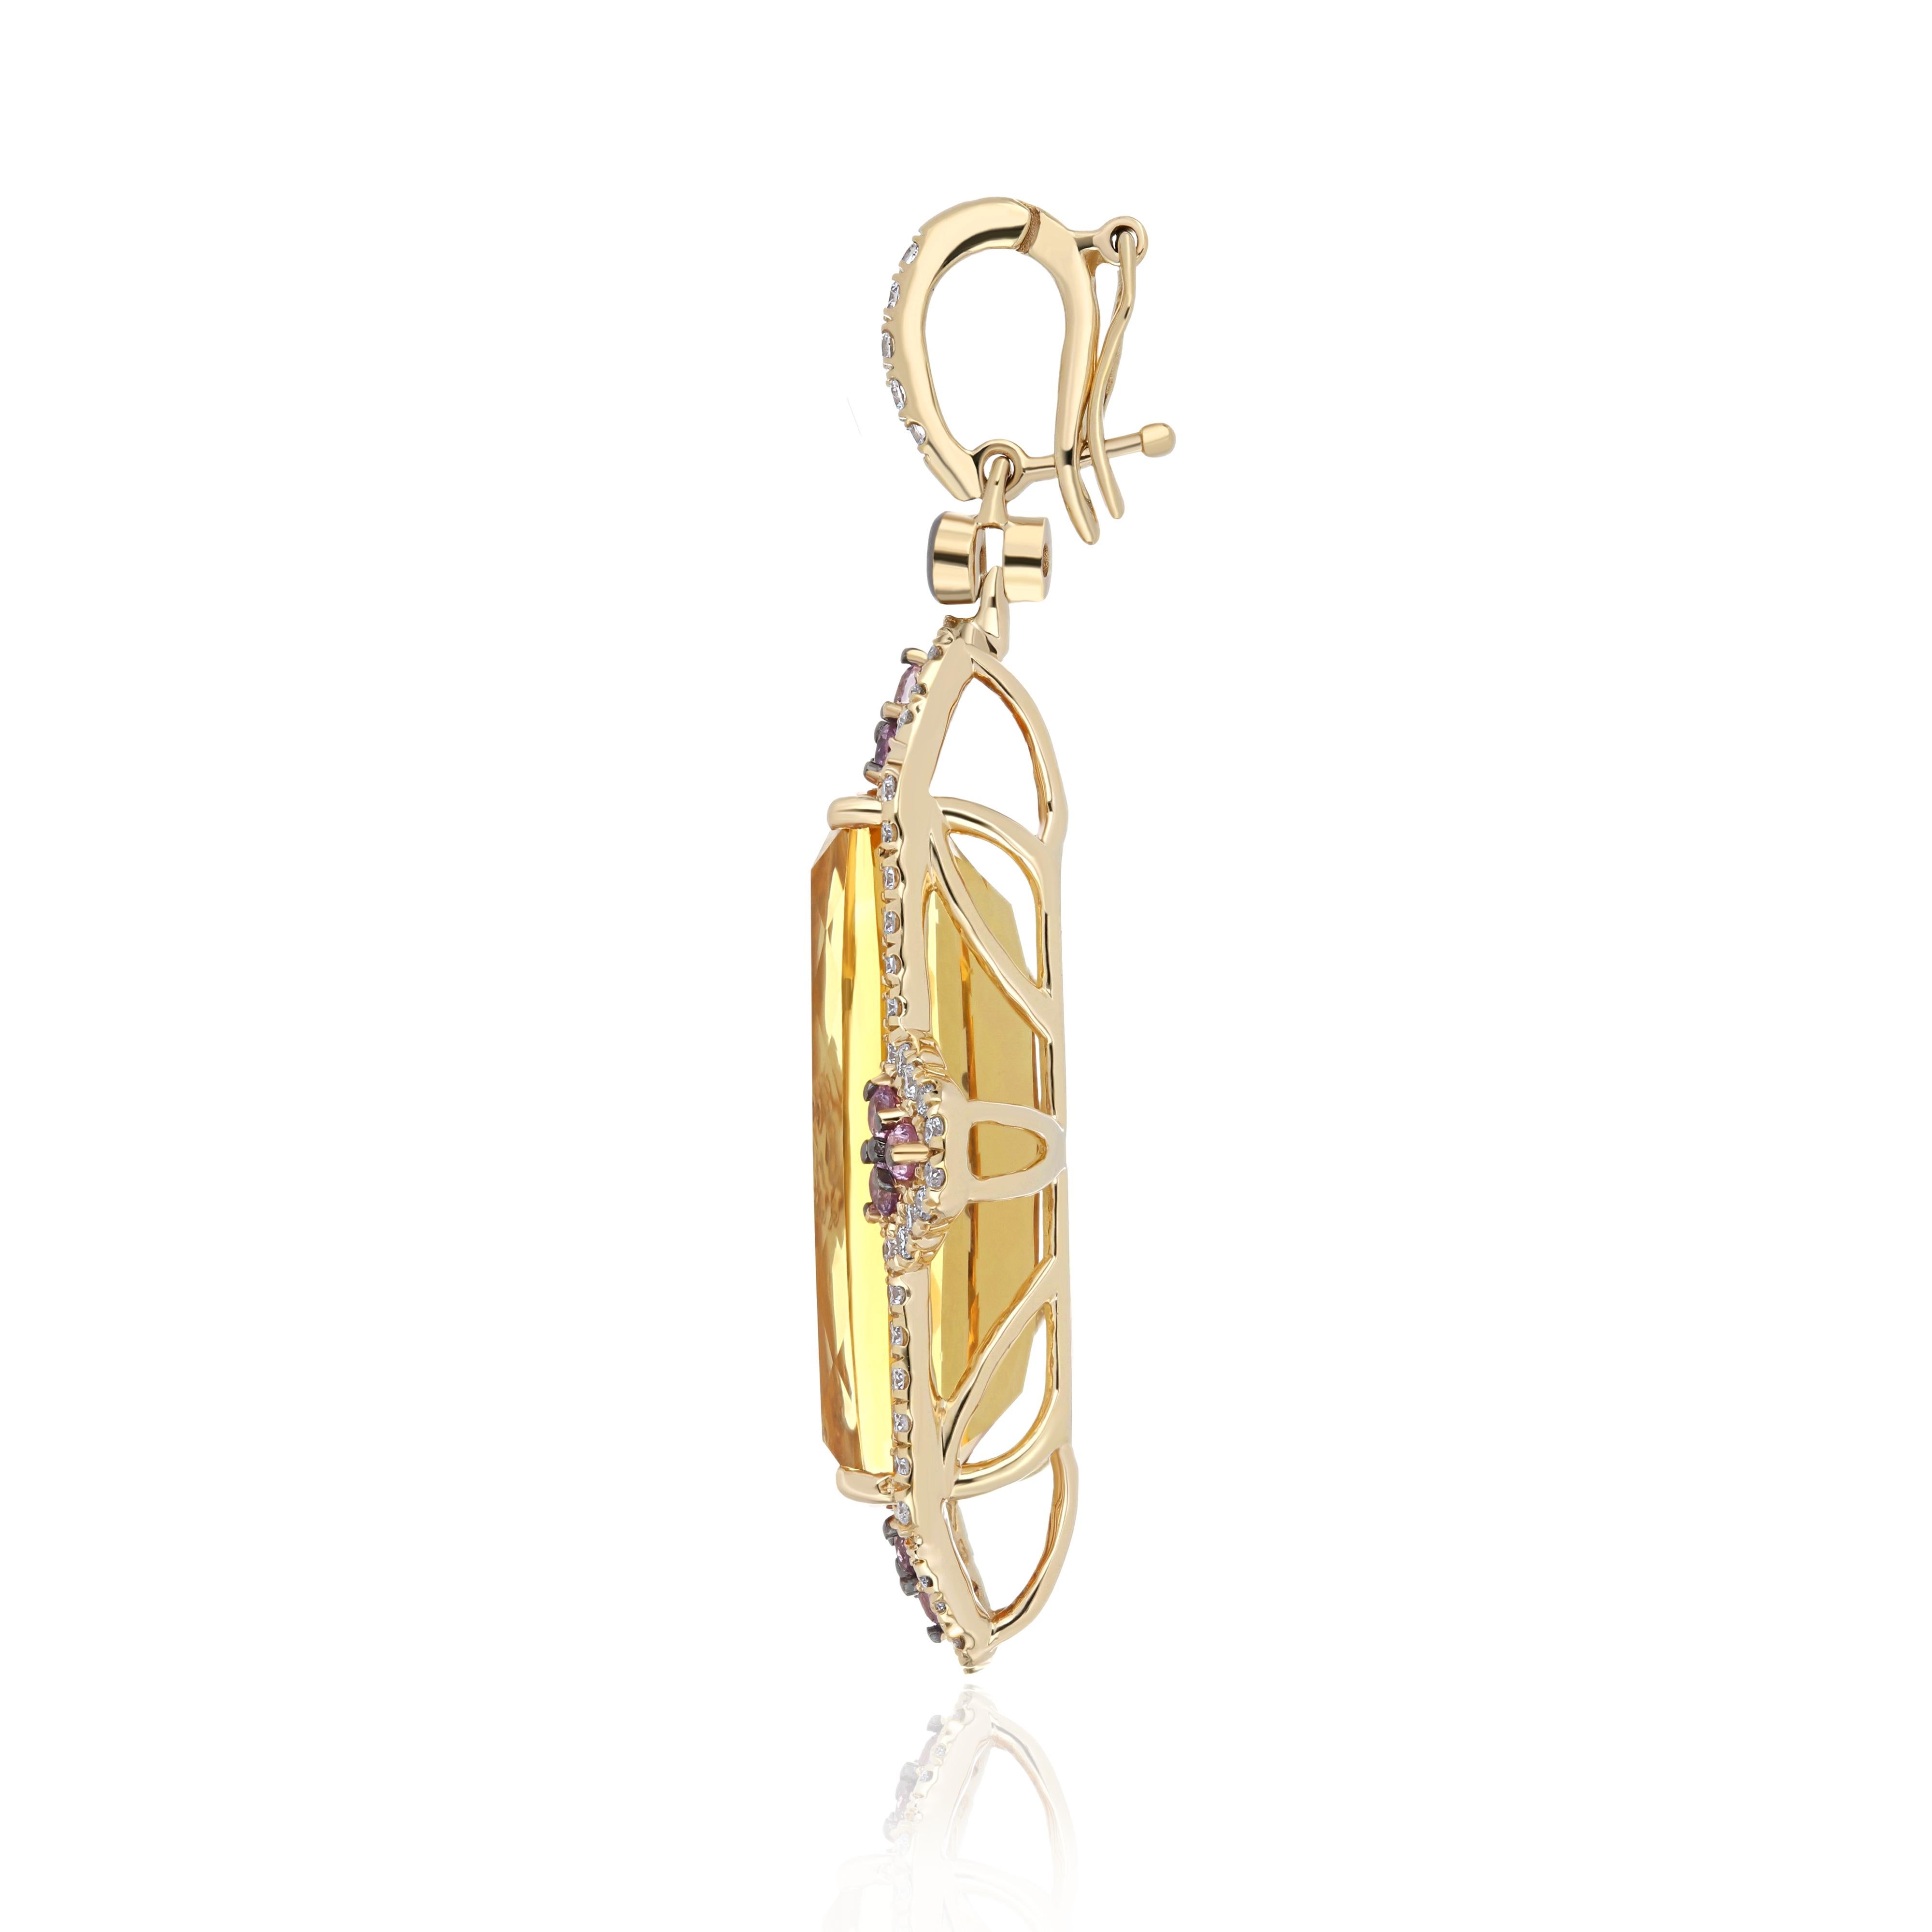 Elegant and Exquisitely detailed cocktail Pendant , Centre Set with vibrant Cushion Shape Citrine Weighing approx. 6.99 Cts accented with intense Pink Sapphire and Micro Pave Set Diamonds weighing approx. 0.31 Cts, Beautifully Hand Crafted in 14